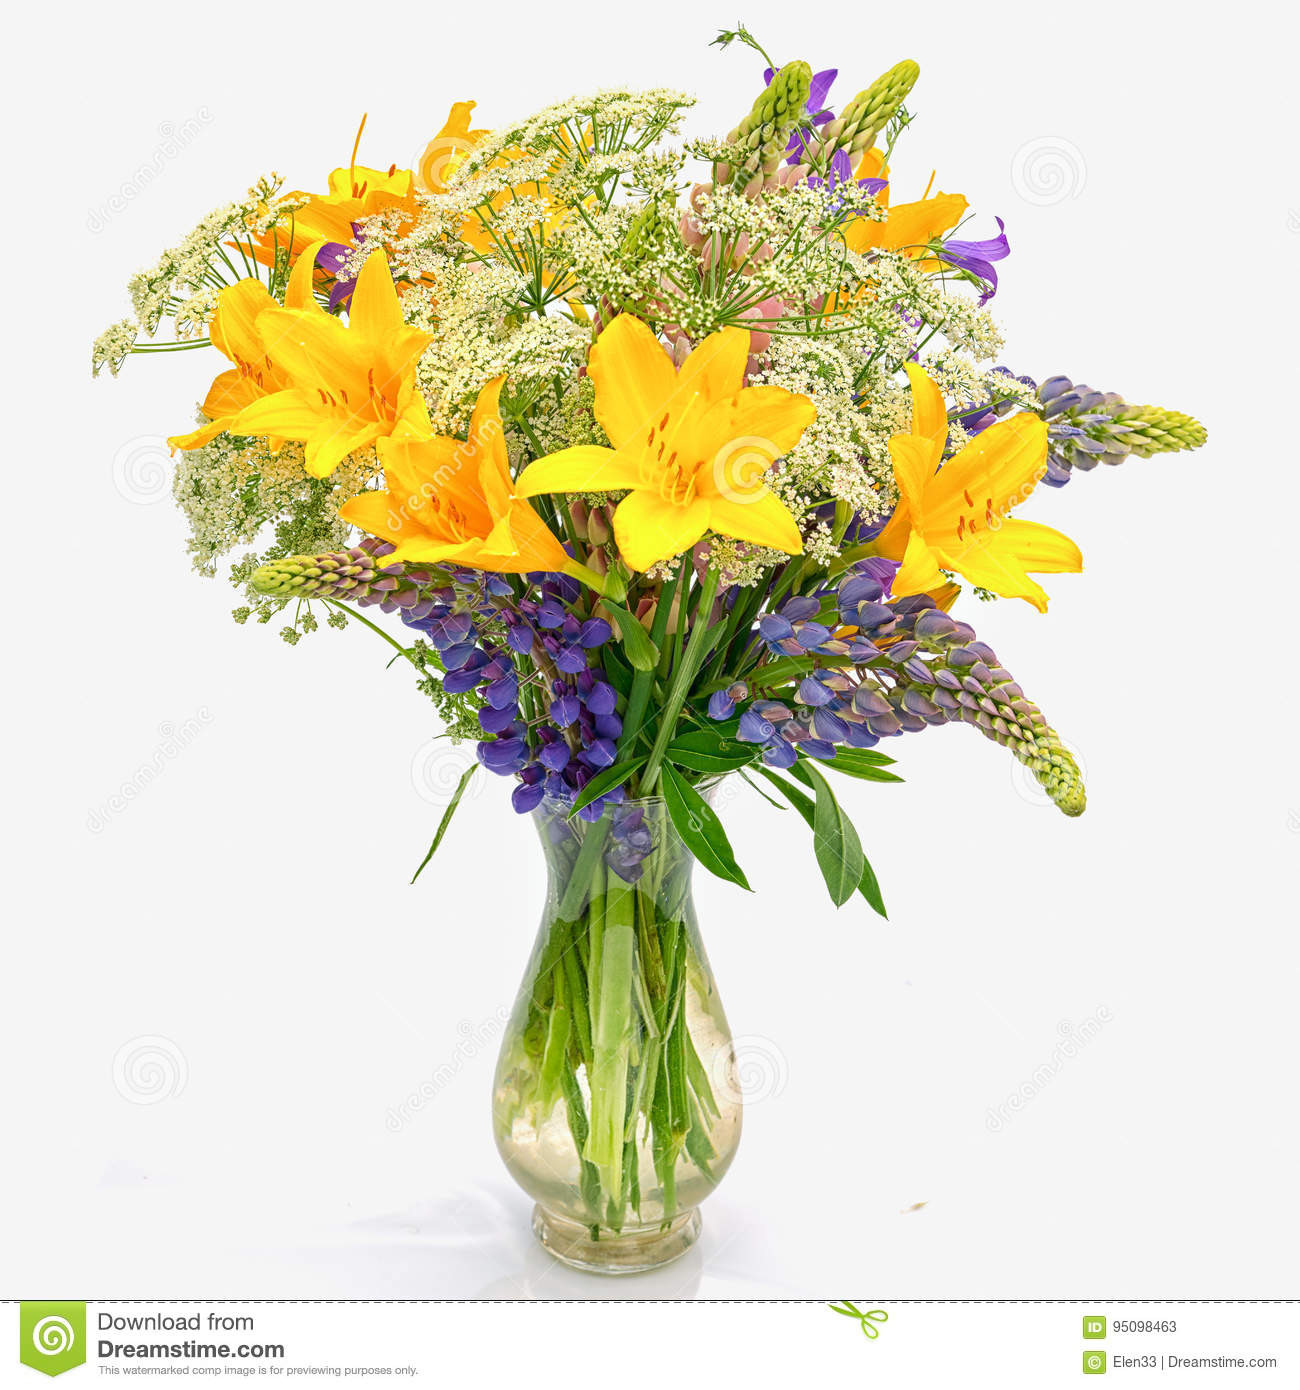 13 Stylish Clear Glass Cylinder Vases Cheap 2024 free download clear glass cylinder vases cheap of bouquet stock image image of bouquet beauty lily blossom 95098463 regarding bouquet od wild flowers achillea millefolium day lily and lupine in a transpar